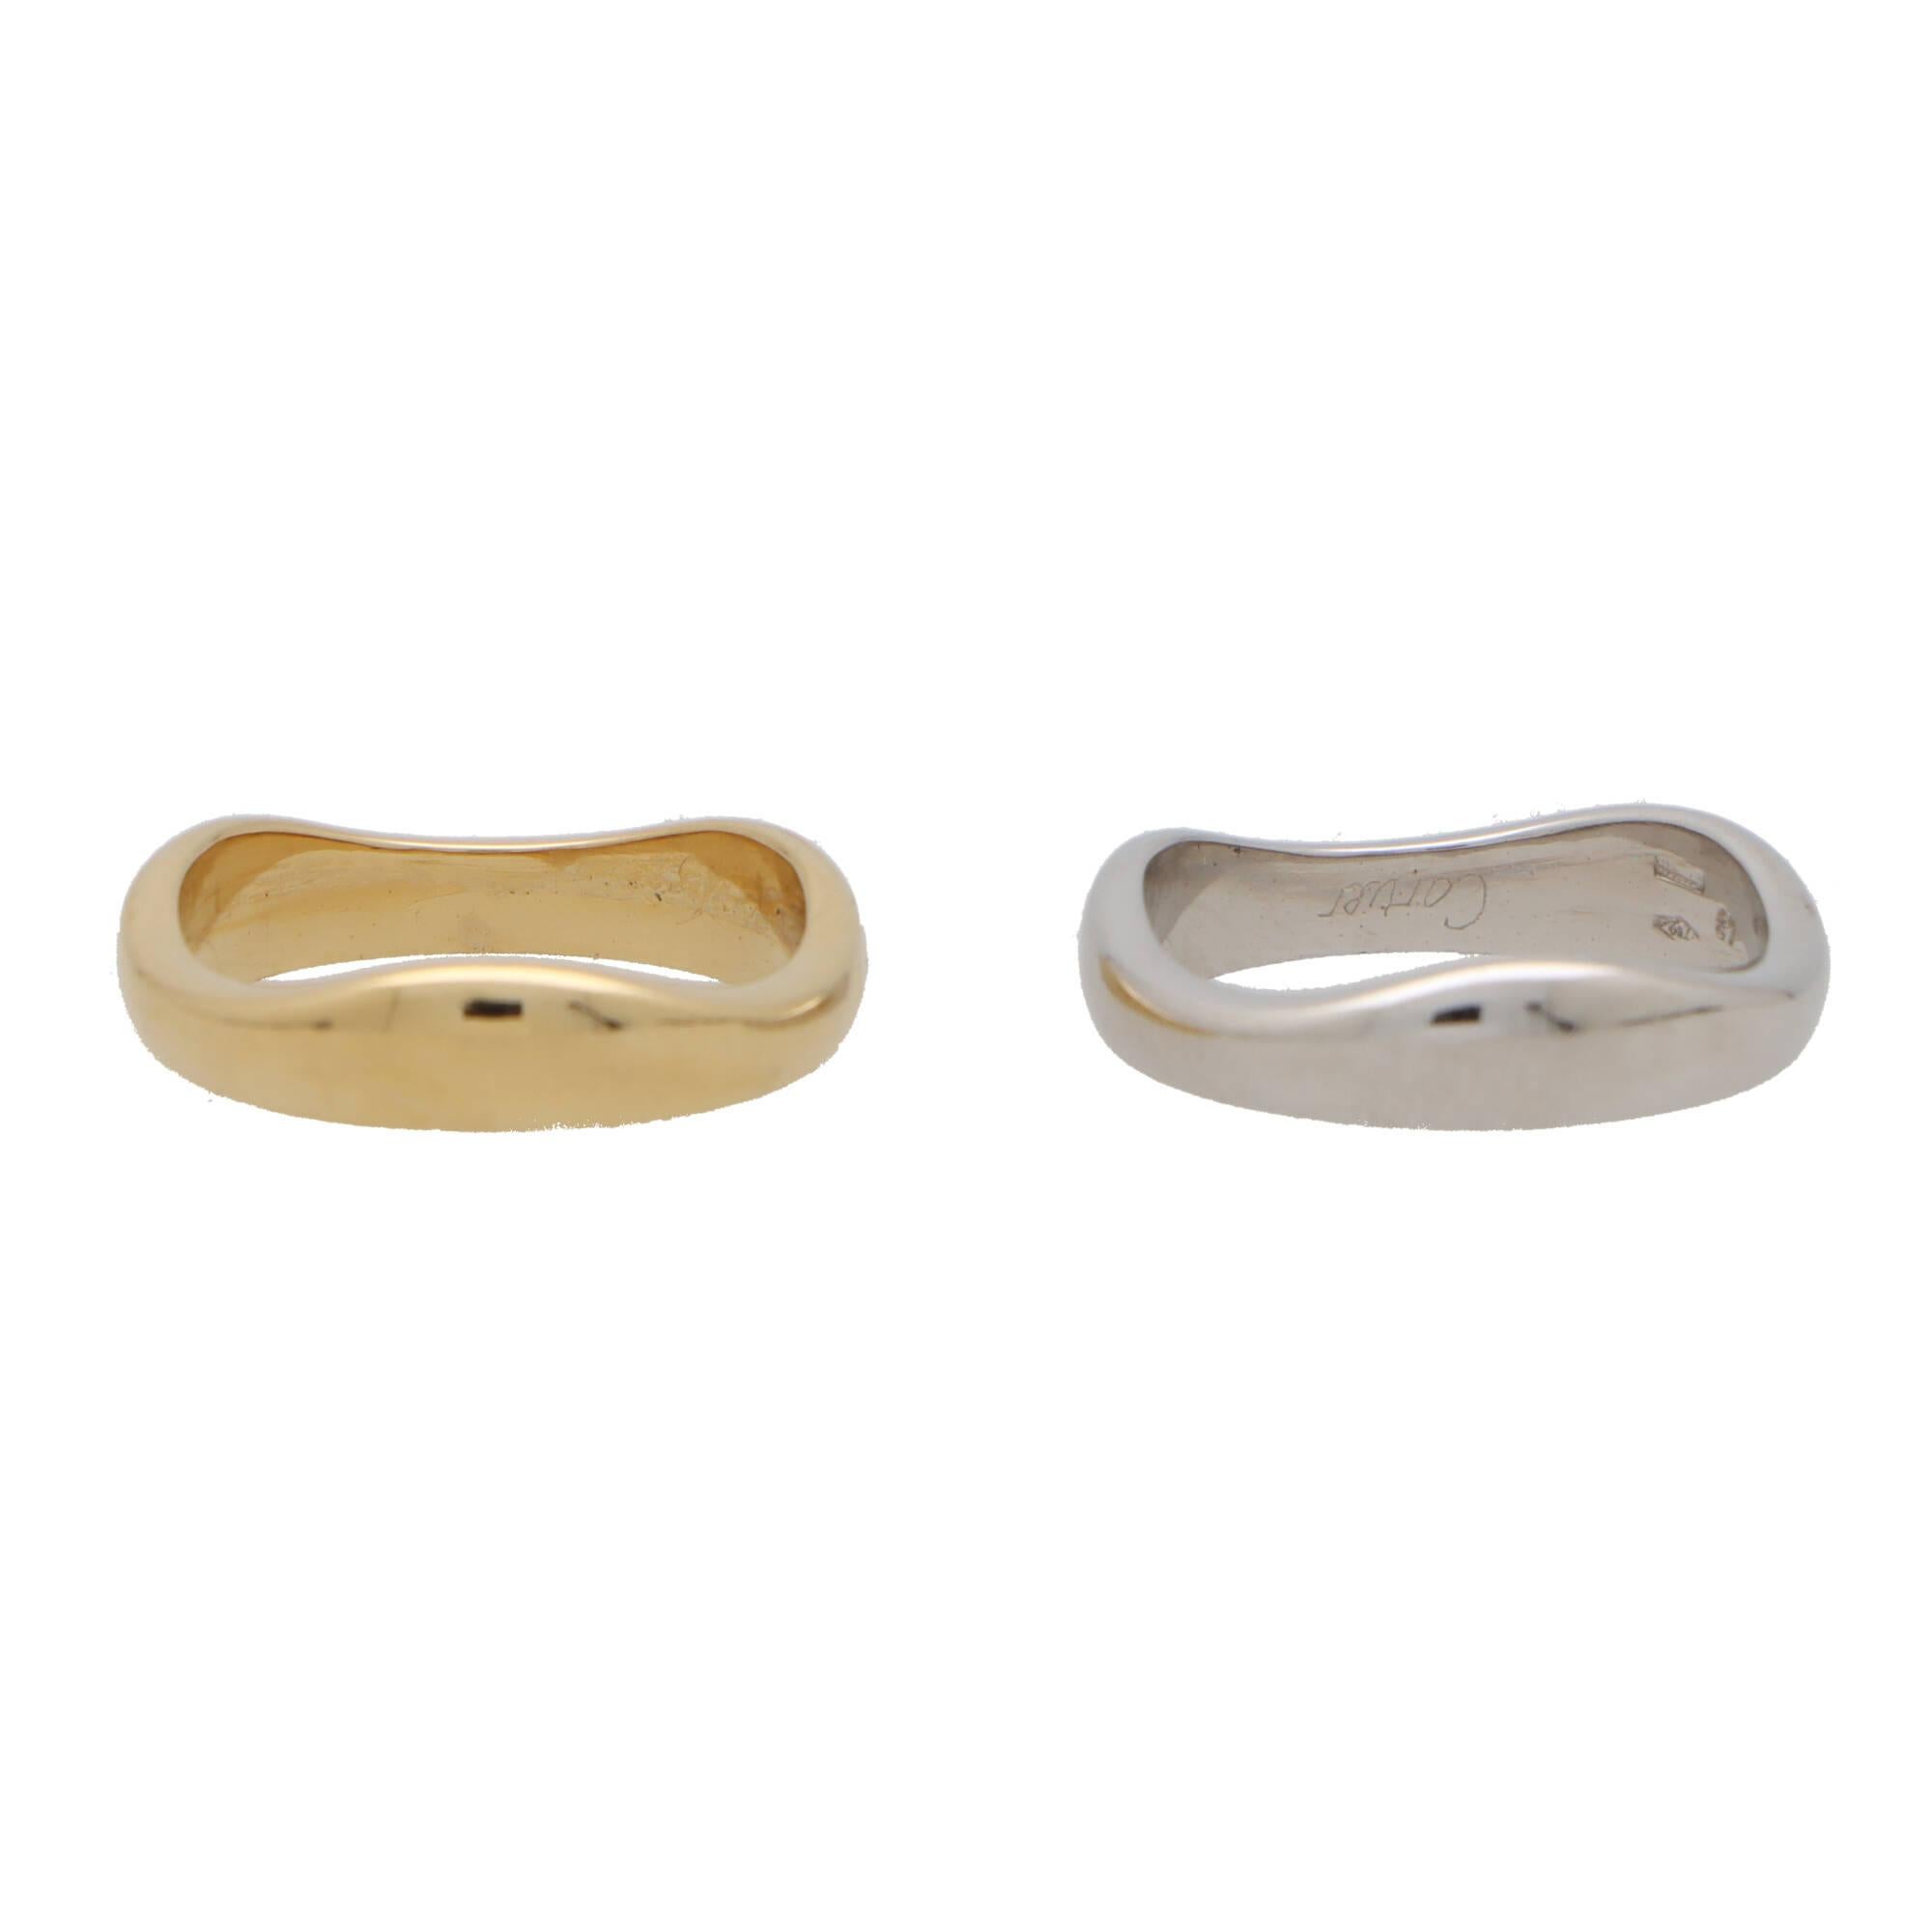 A beautiful Cartier 'Love Me' band ring set in 18k yellow and white gold. 

The ring is composed of two 5-millimetre bands carved to perfectly fit together. The ring can easily be worn for every day as a standalone piece, or alternatively, stacked